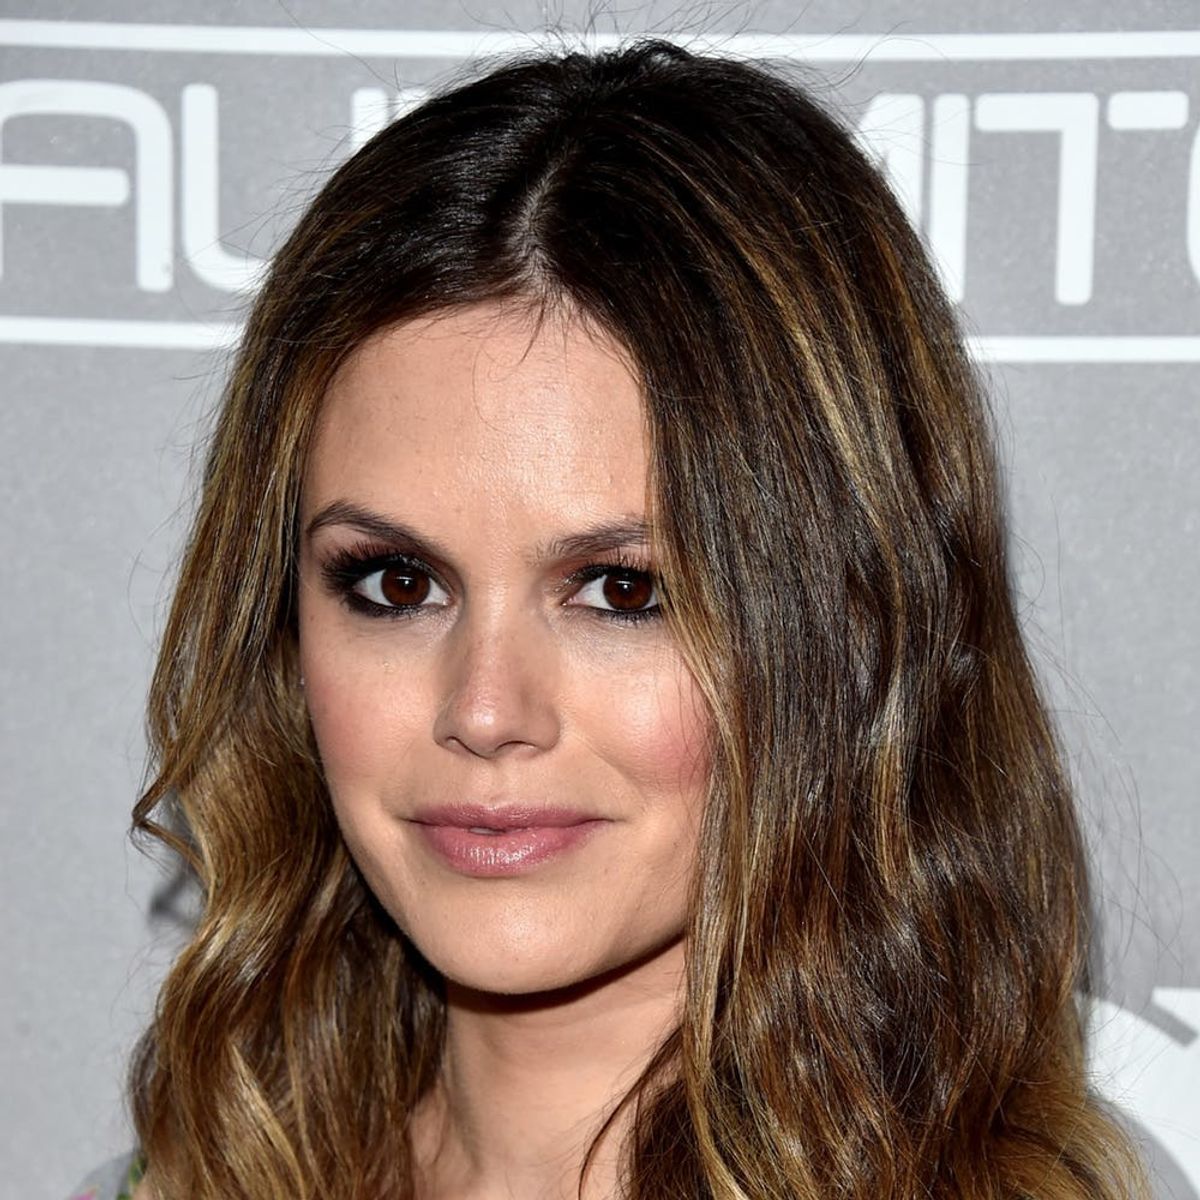 Rachel Bilson Is Poised for a Comeback As the Newest Cast Member of Nashville